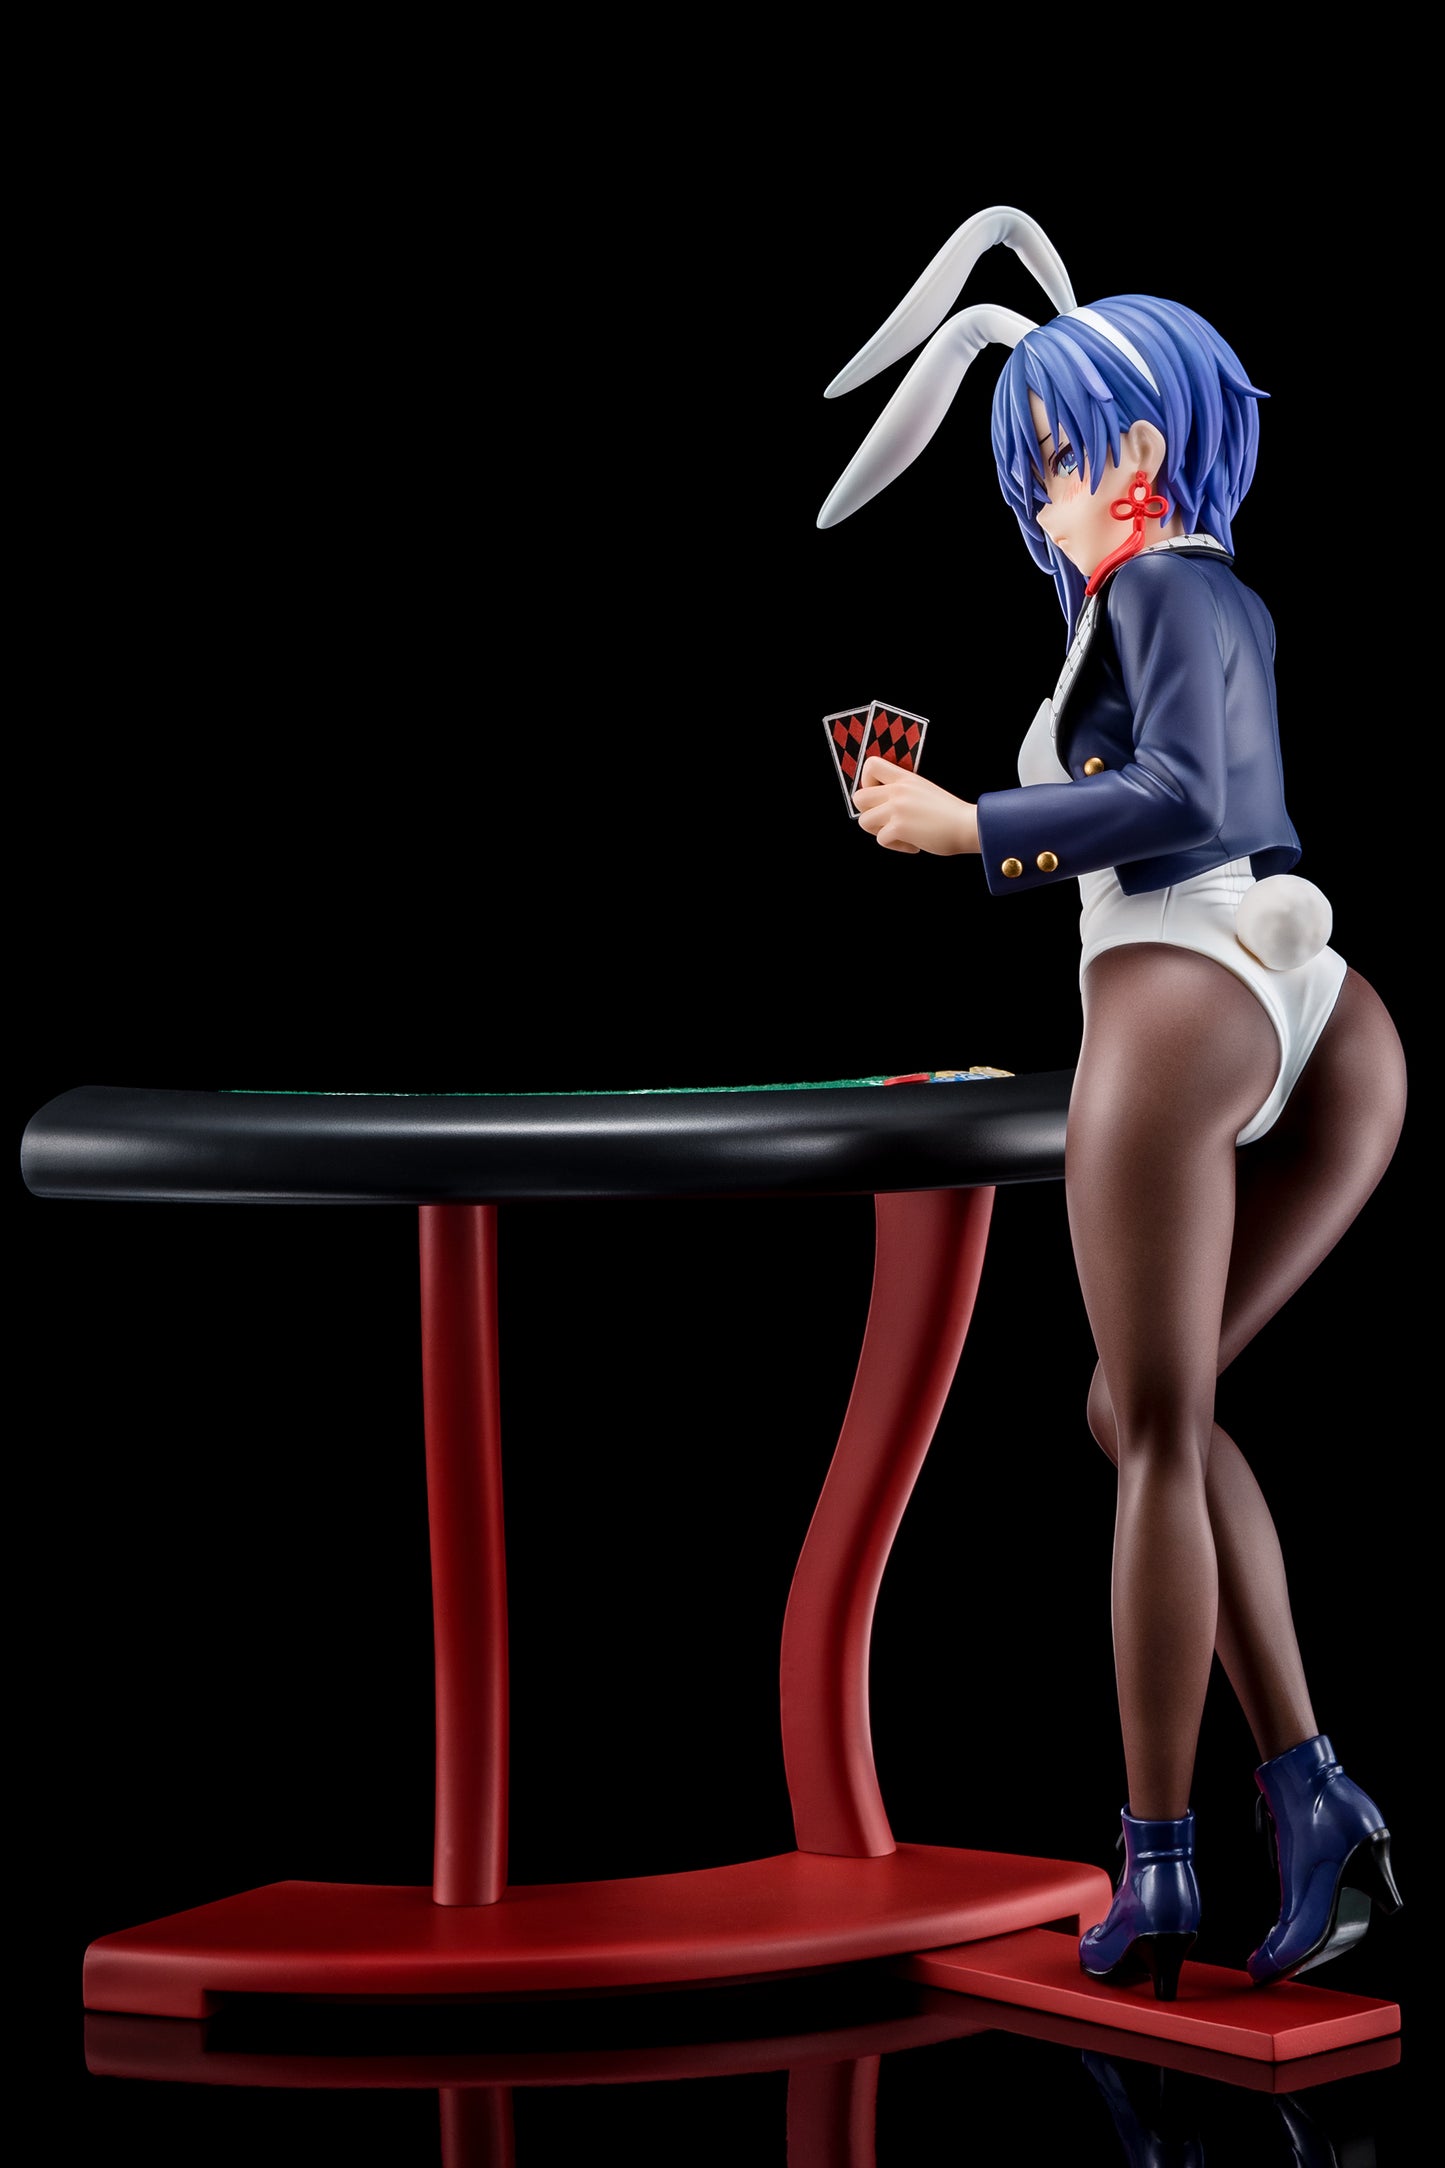 1/6 scaled pre-painted figure of The Demon Sword Master of Excalibur Academy Sakuya Sieglinde wearing lapis lazuli blue bunny costume with Nip Slip Gimmick System